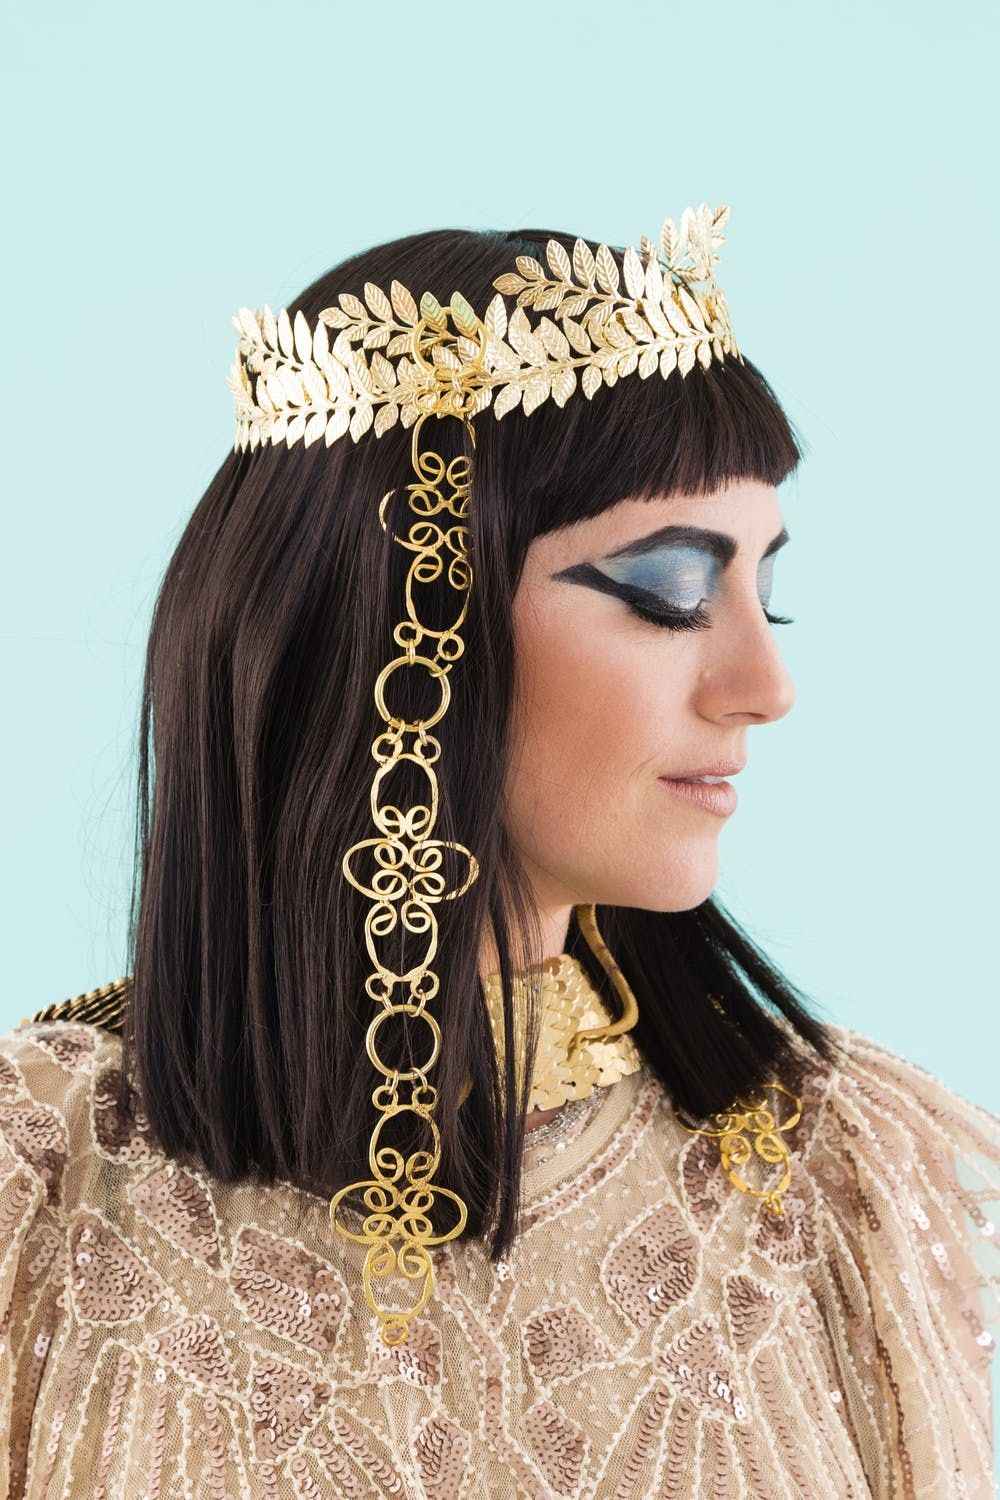 Pyramidpunk Cleopatra with a futuristic hairstyle, | Stable Diffusion